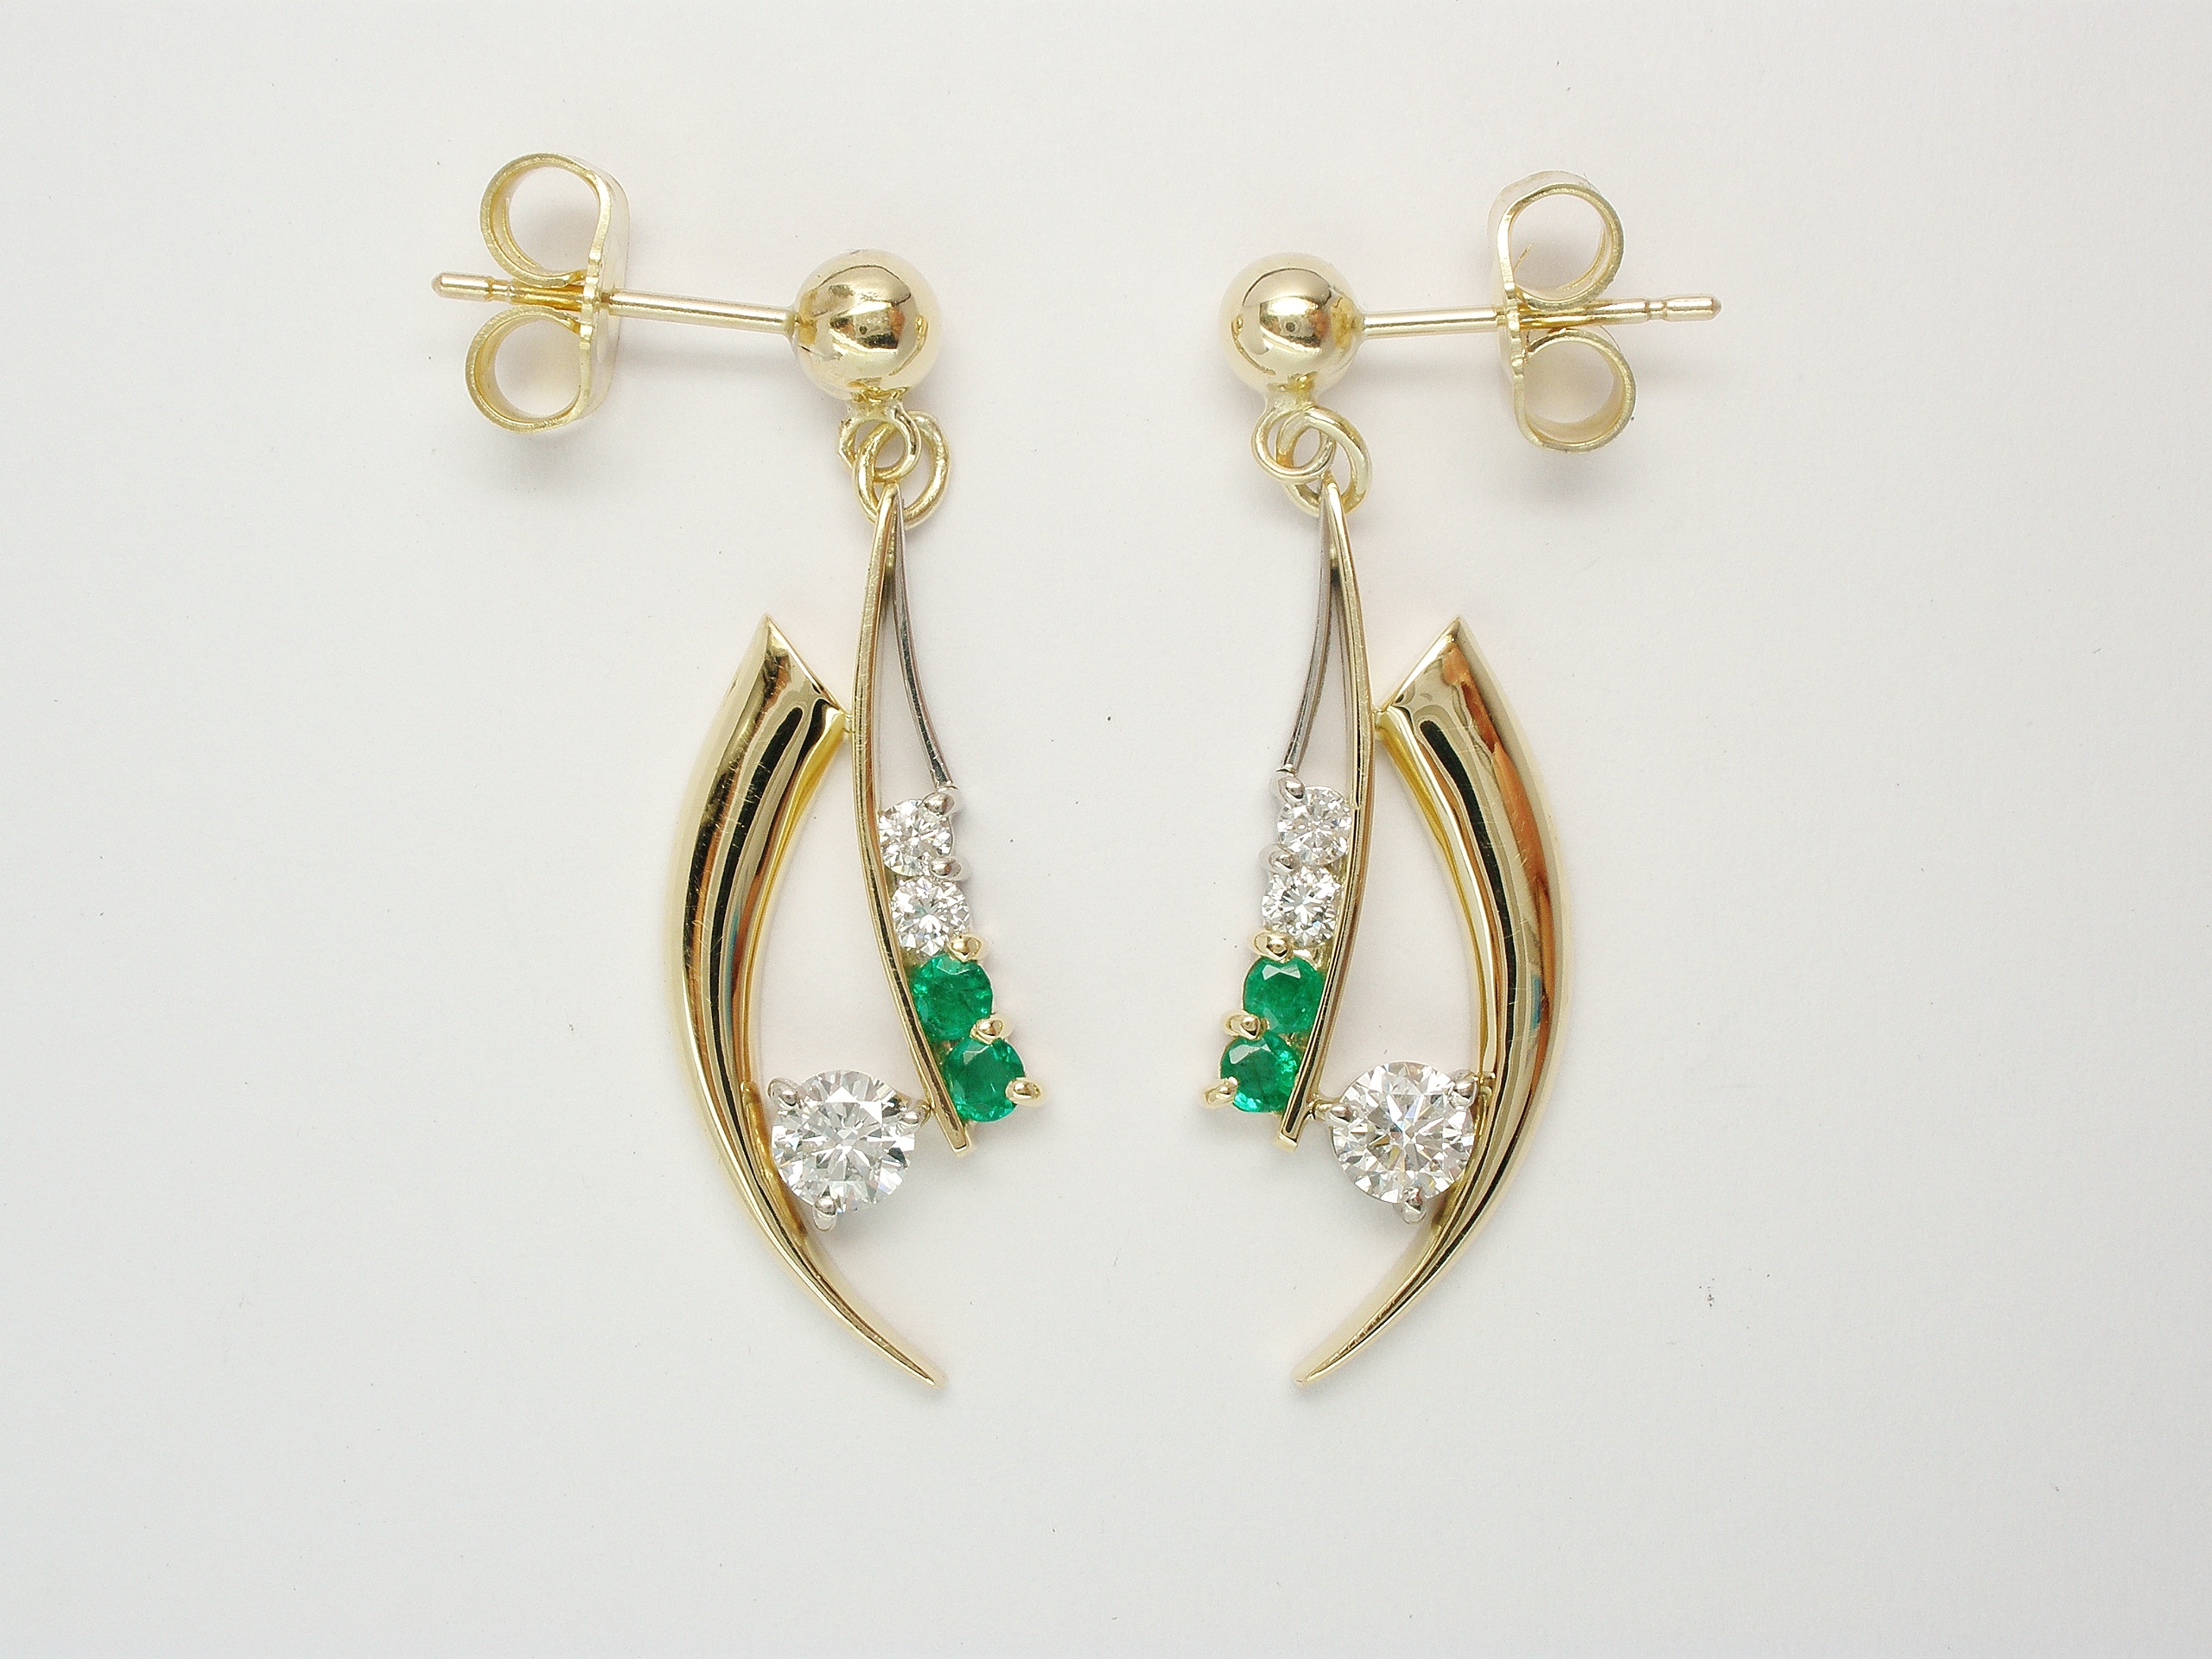 Pair of Horn shaped 9ct. yellow gold and palladium wire earrings set with diamonds & emeralds.